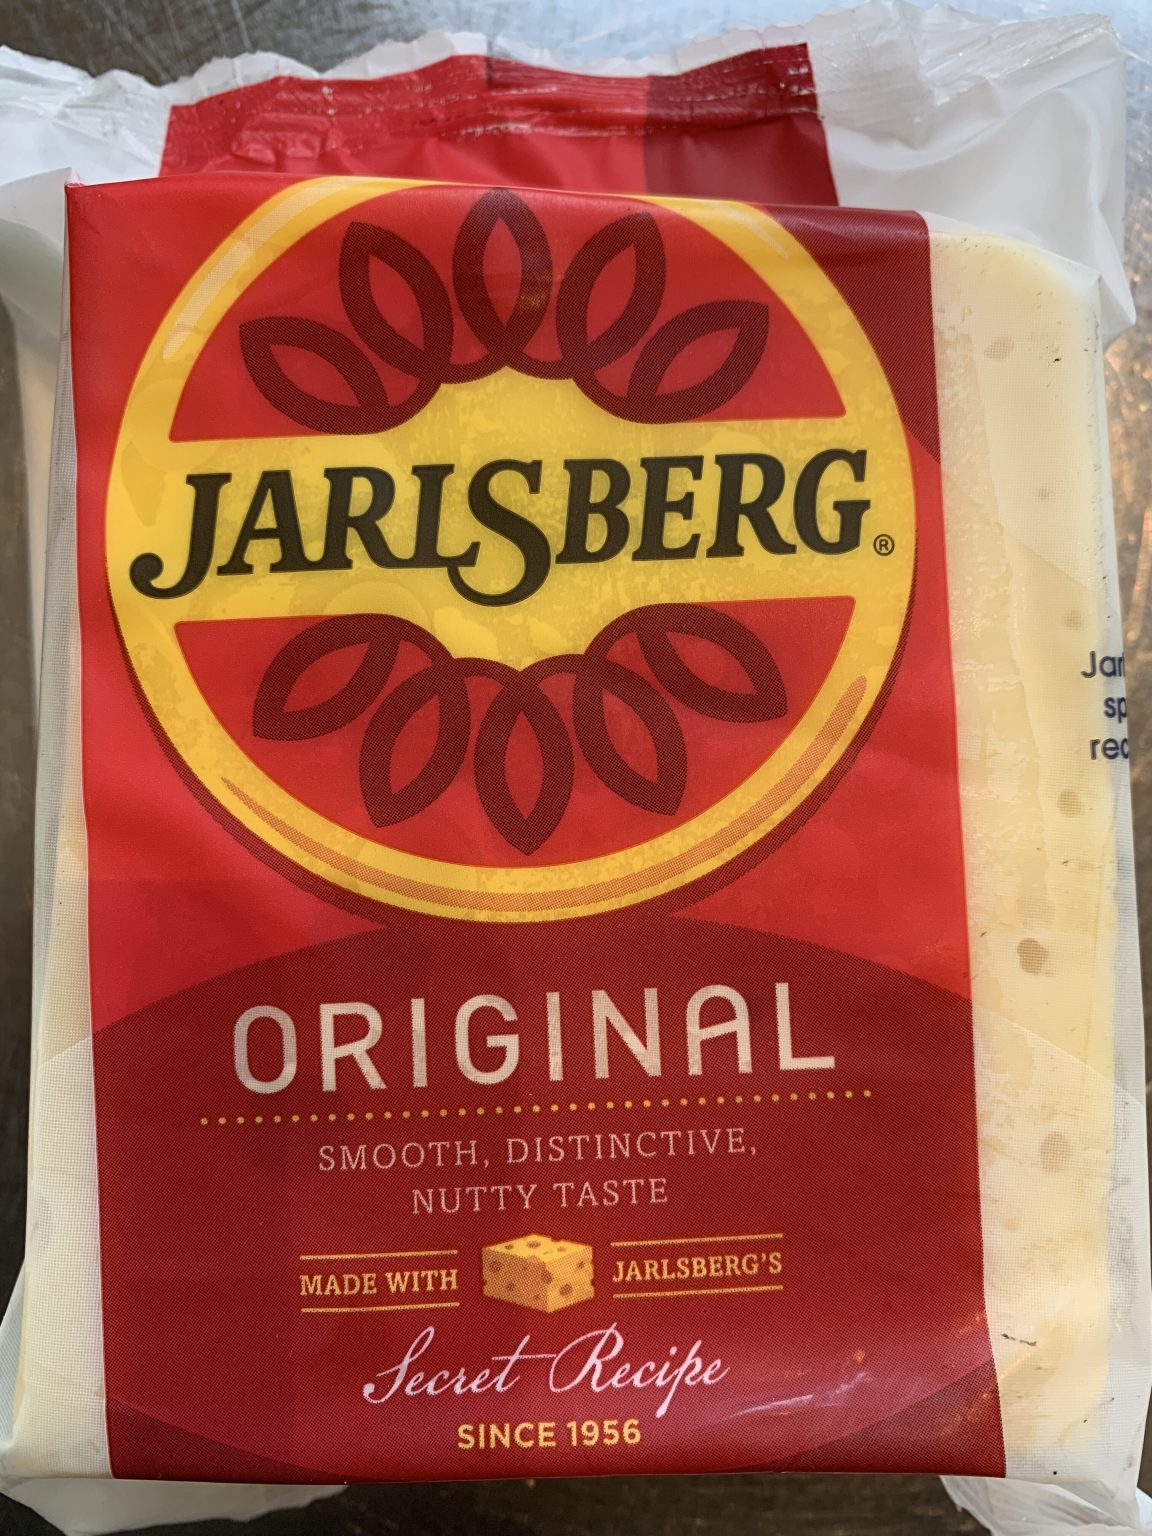 Jarlsberg cheese could help prevent osteoporosis